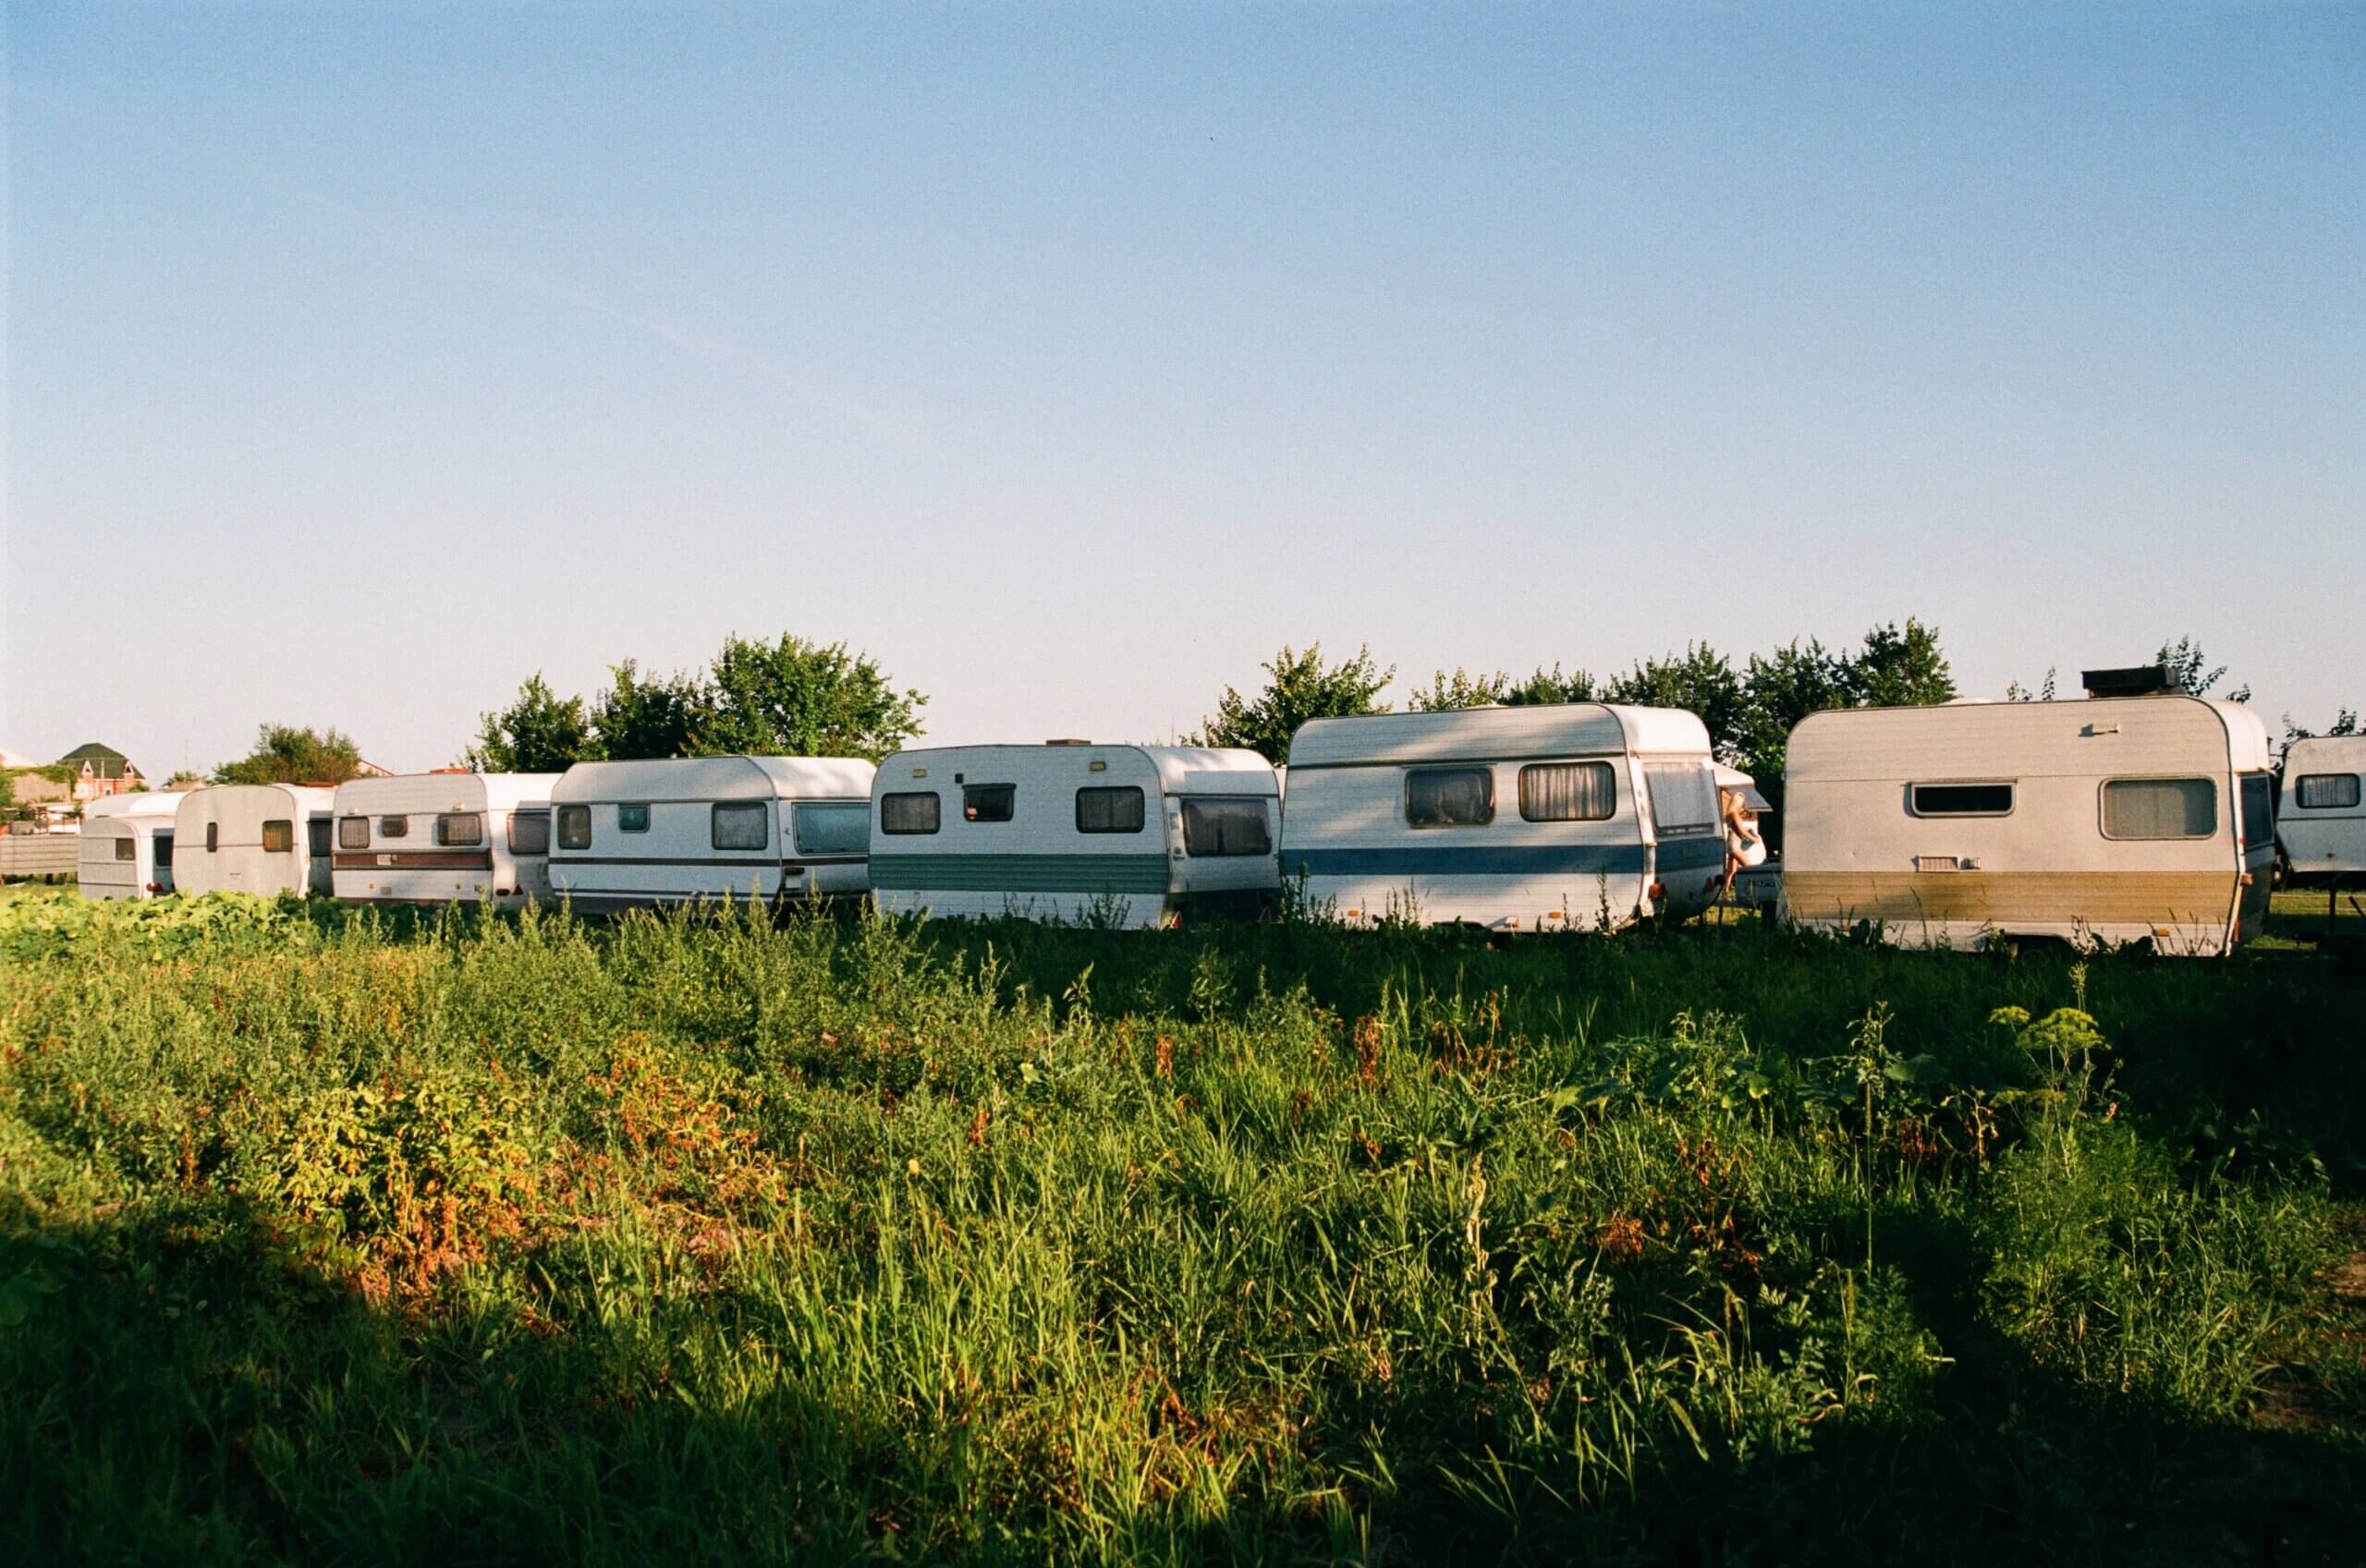 Stay at Reserve Smith County RV park and save money on your next vacation.